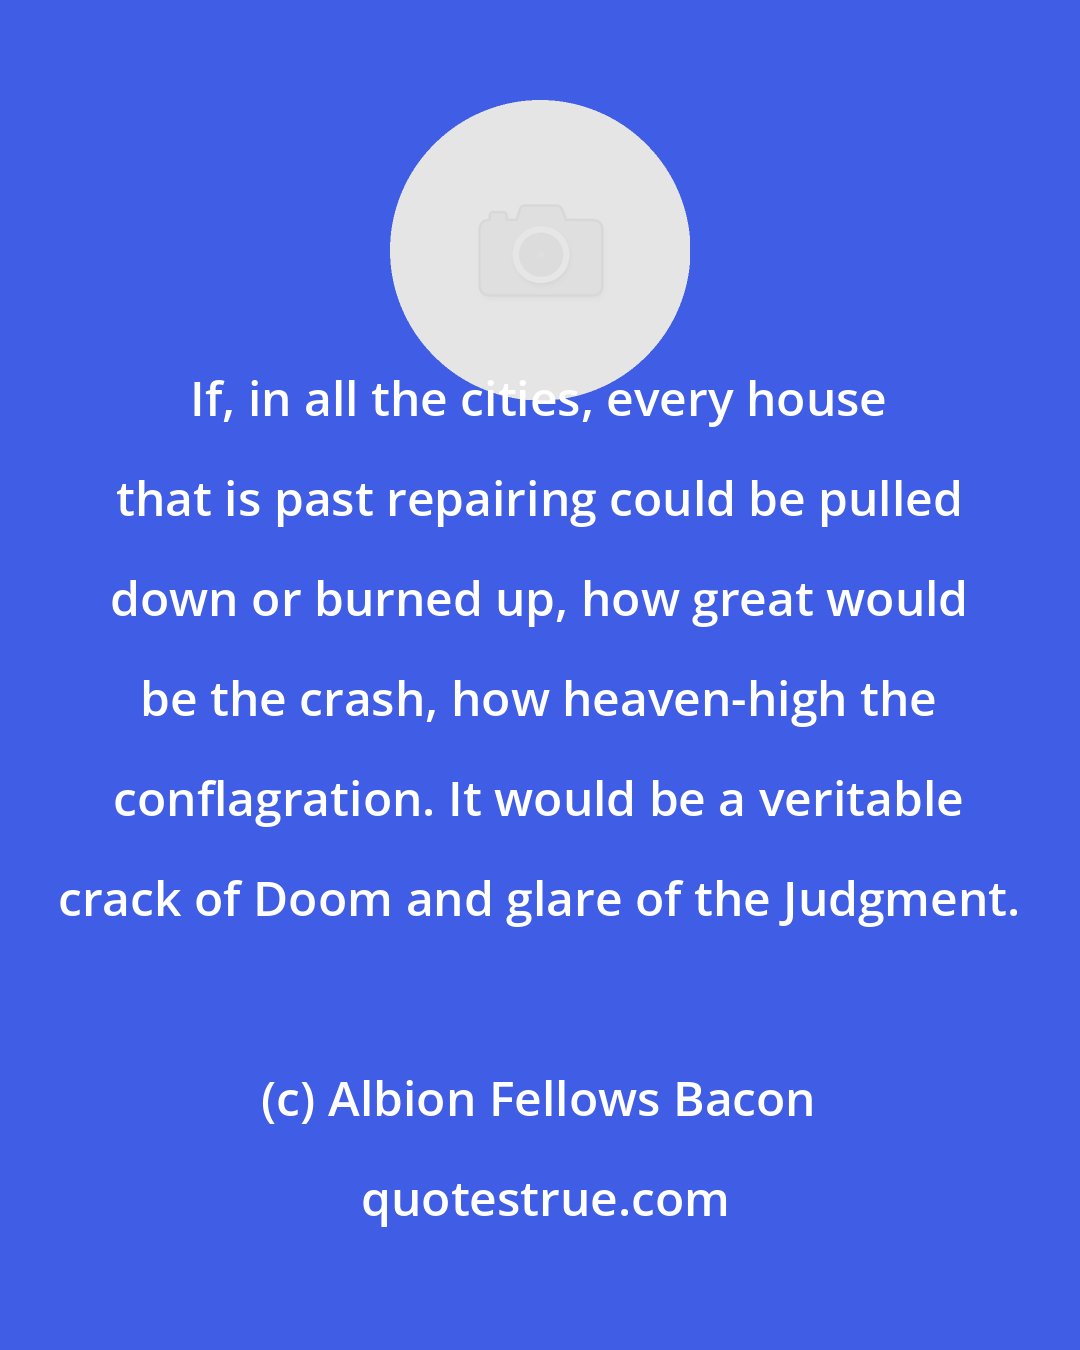 Albion Fellows Bacon: If, in all the cities, every house that is past repairing could be pulled down or burned up, how great would be the crash, how heaven-high the conflagration. It would be a veritable crack of Doom and glare of the Judgment.